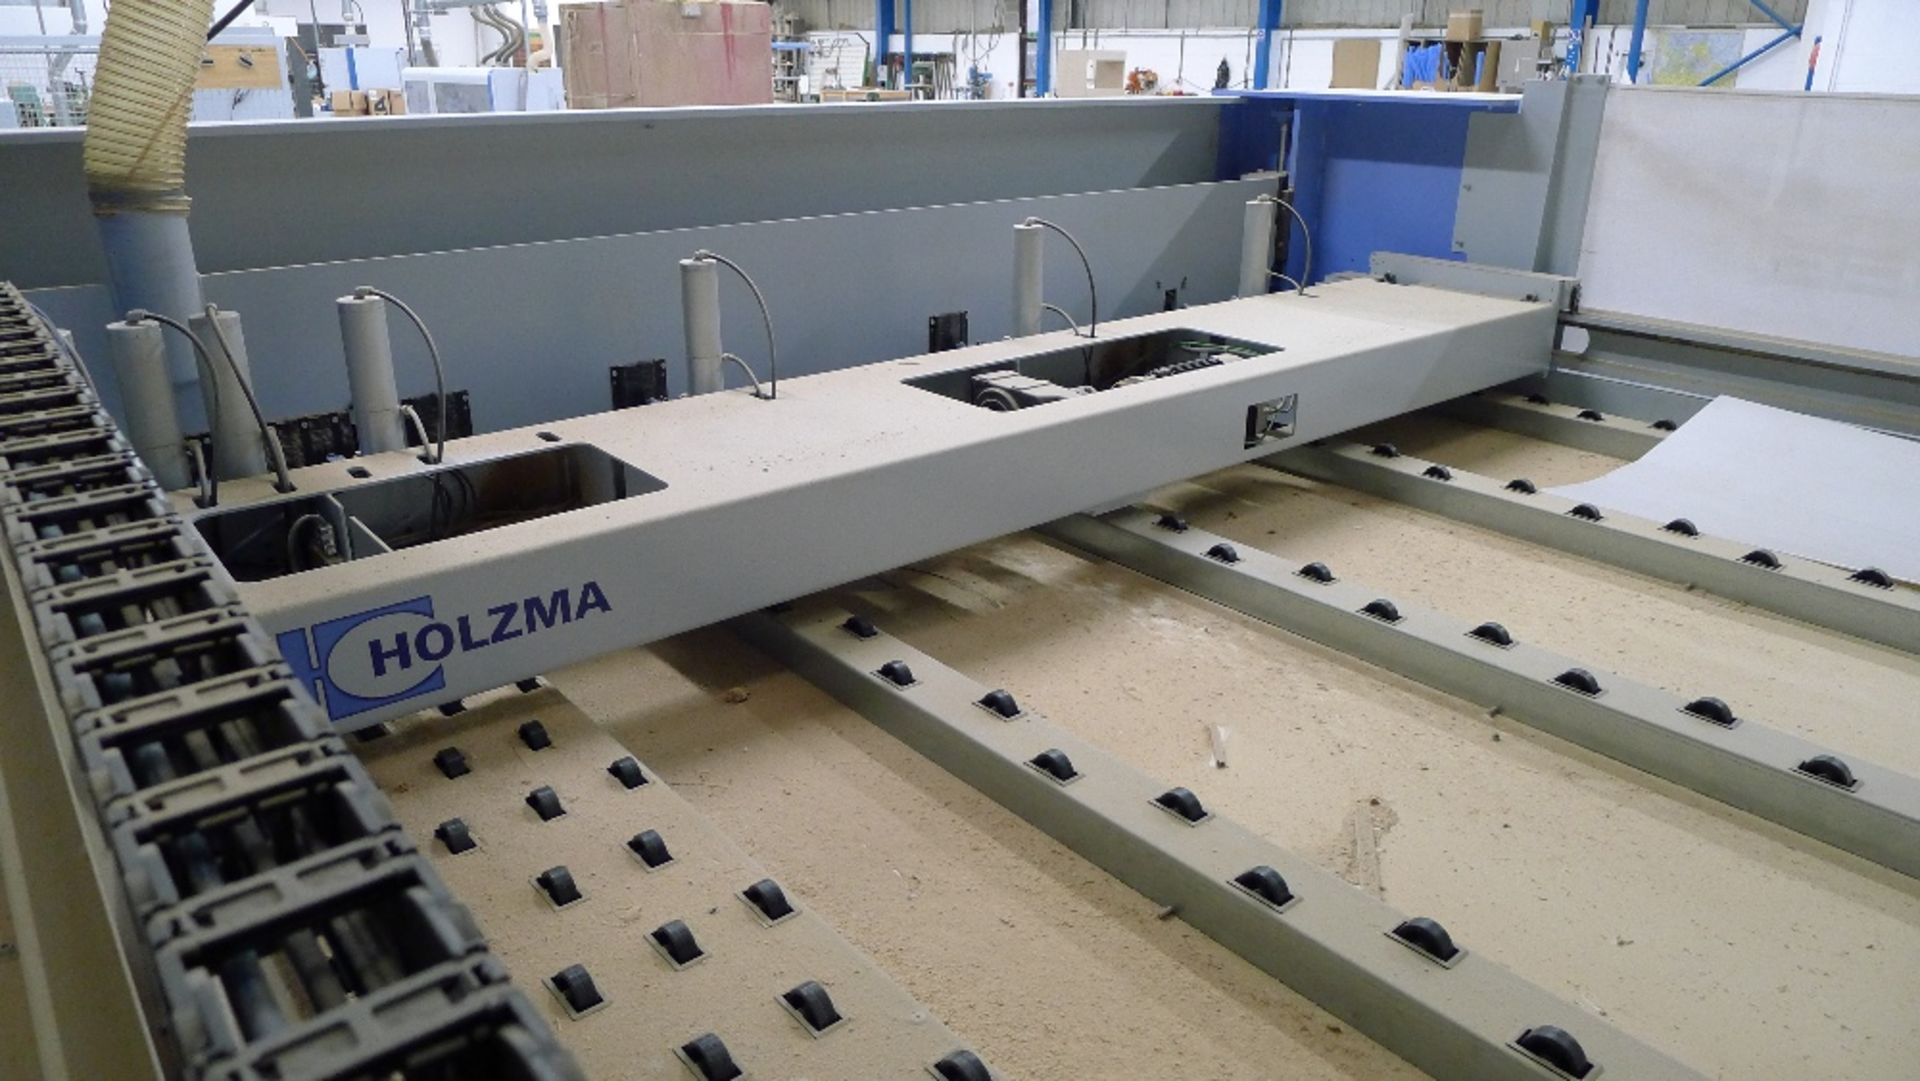 1 CNC Horizontal panel saw with pressure beam by Holzma type Optimat HPP 250/31/31, s/n 0-341-07- - Image 8 of 11